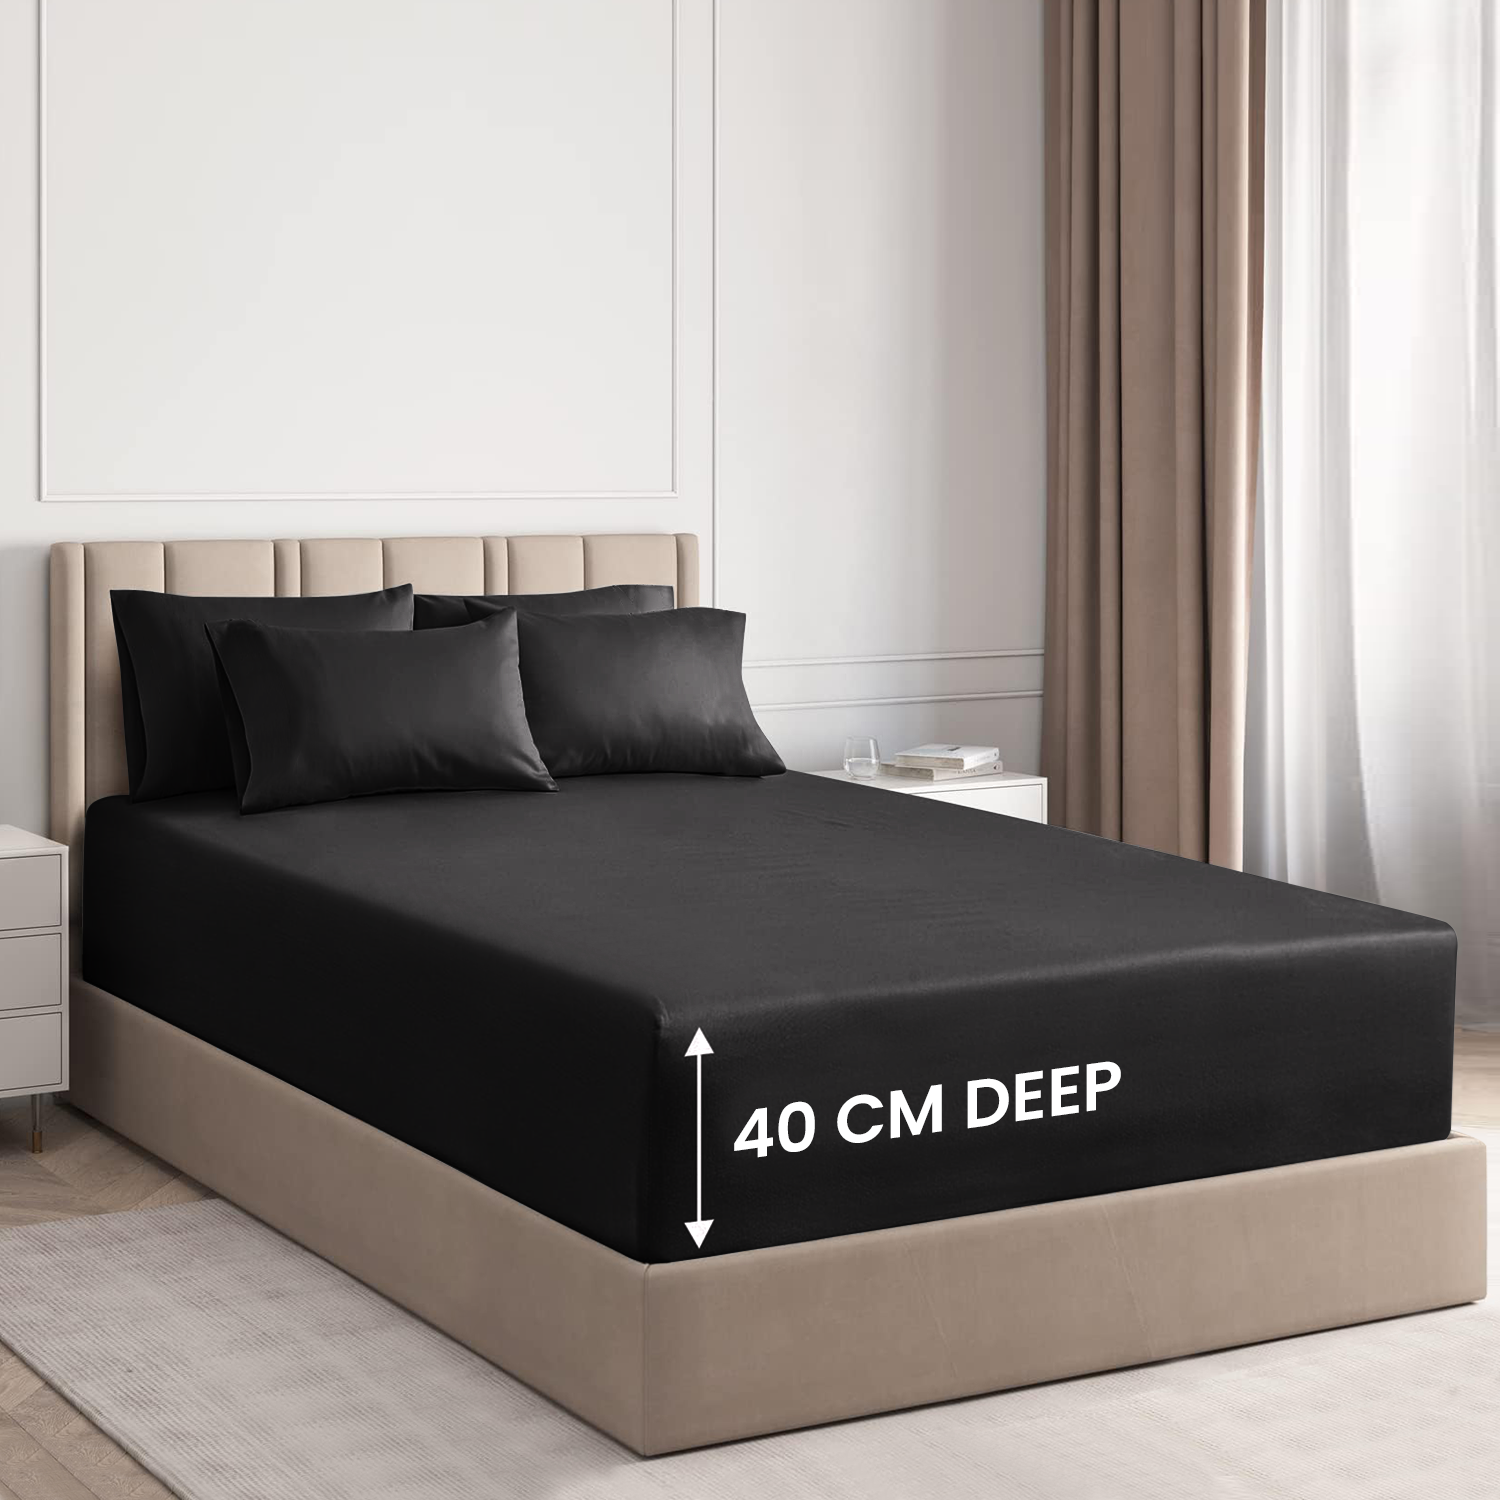 Extra Deep Fitted Sheets 25CM & 40CM